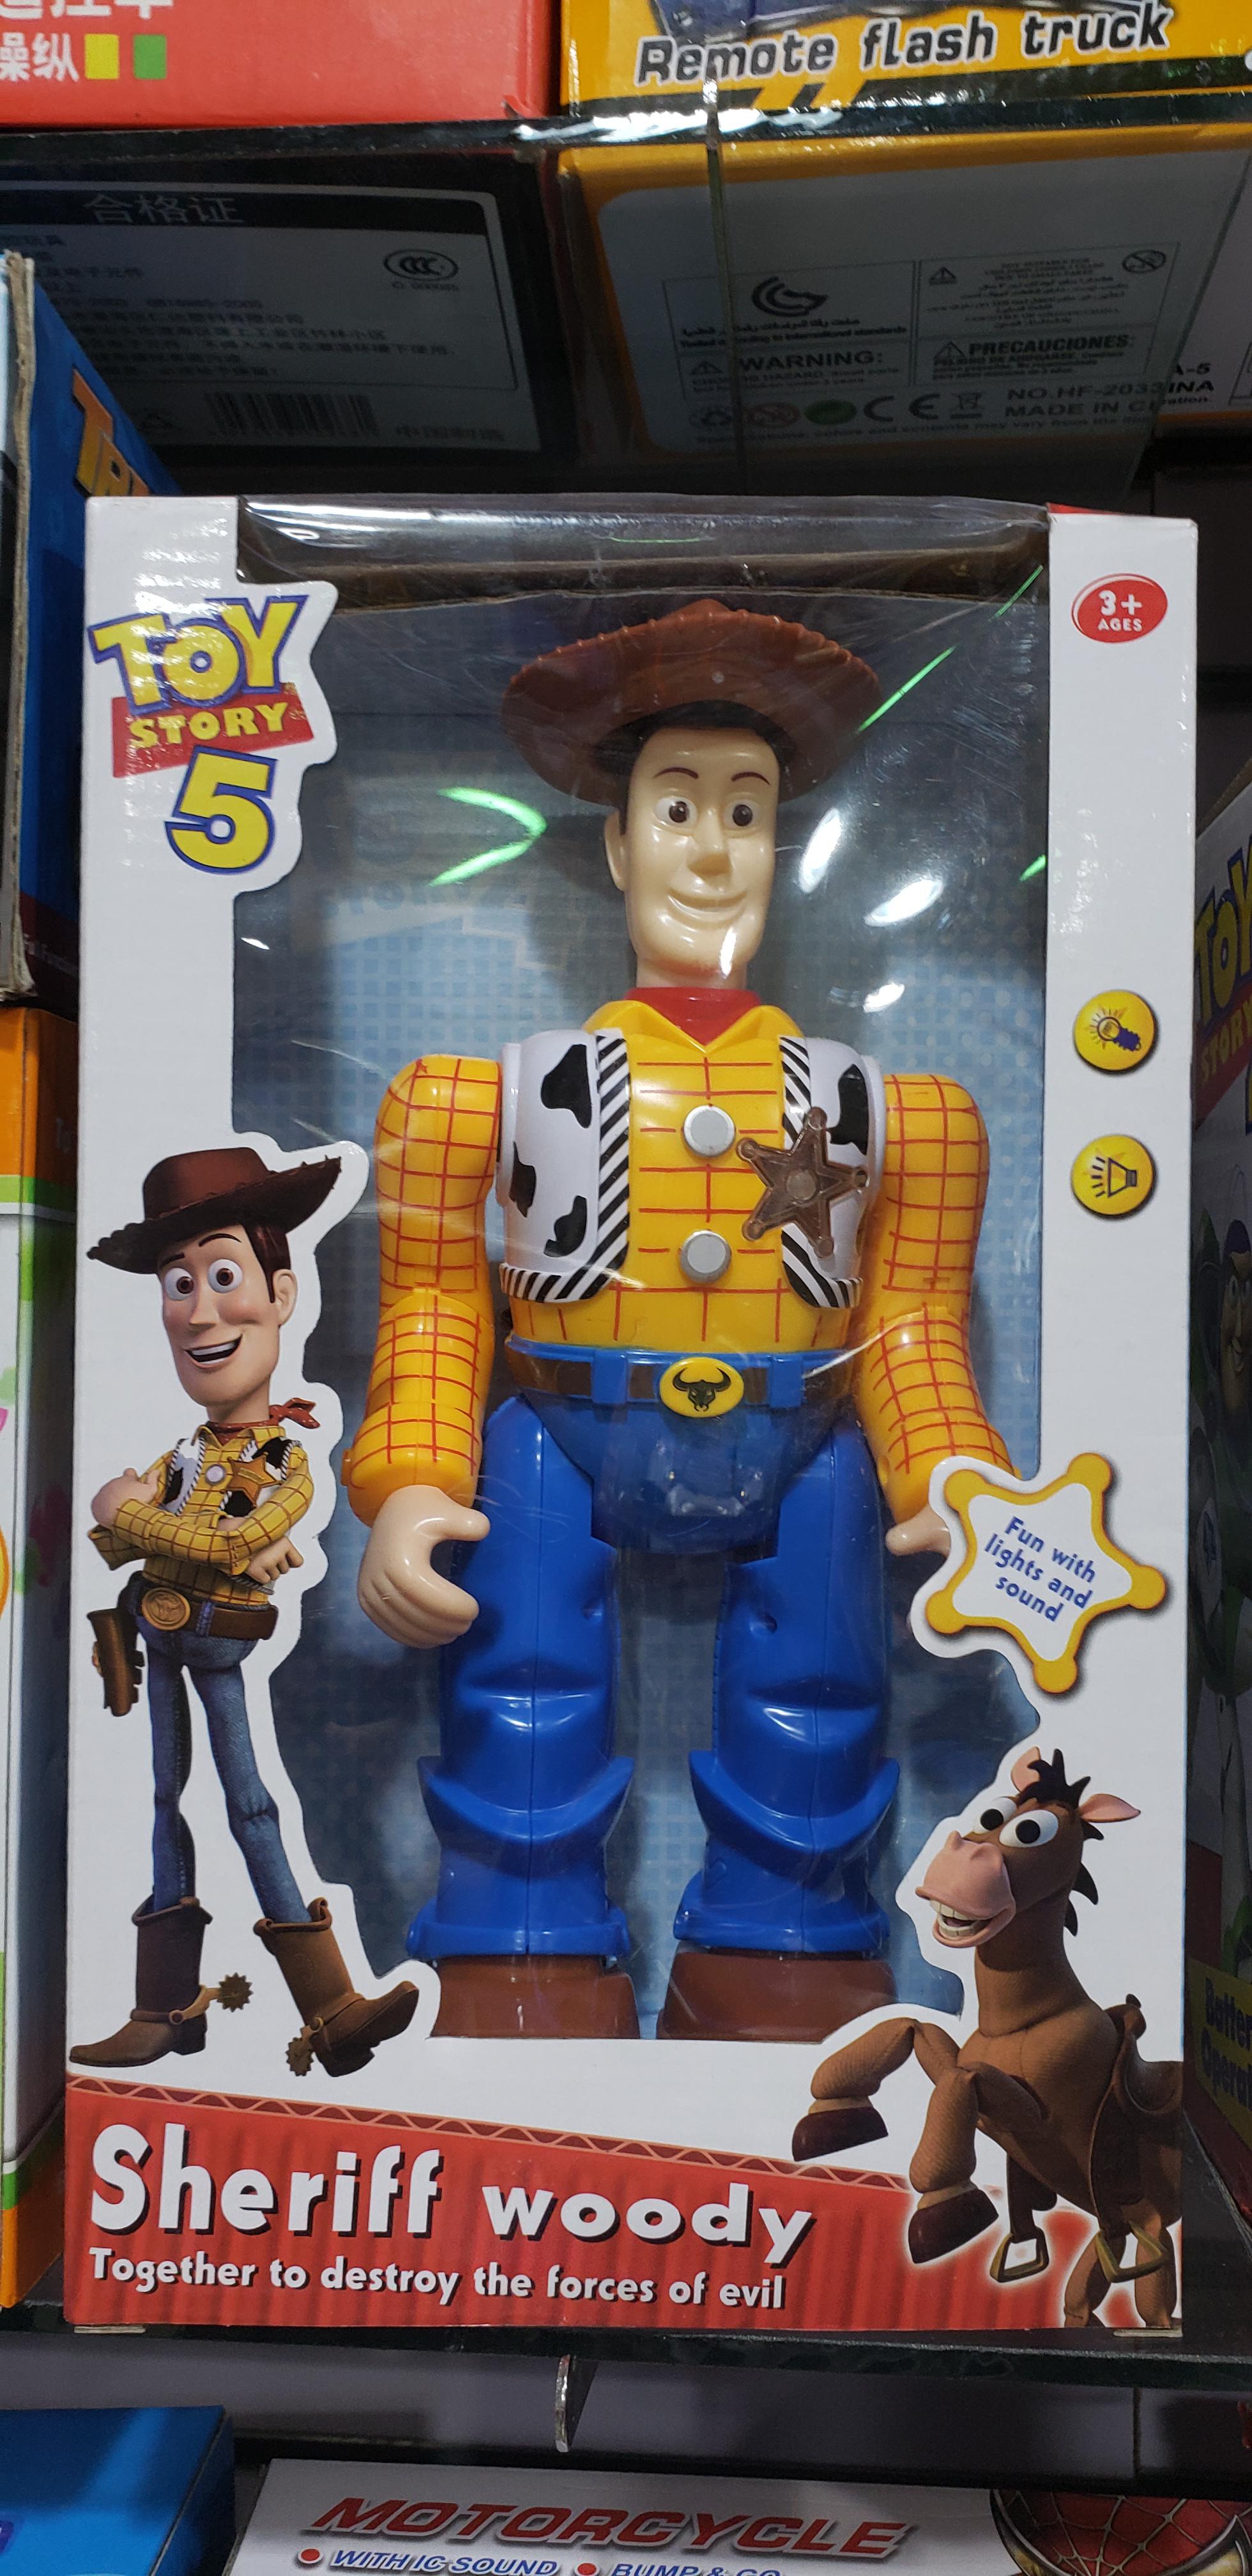 Remote Hash truck Toy Story 5 Ti Sheriff woody a Together to destroy the forces of evil Motorchole